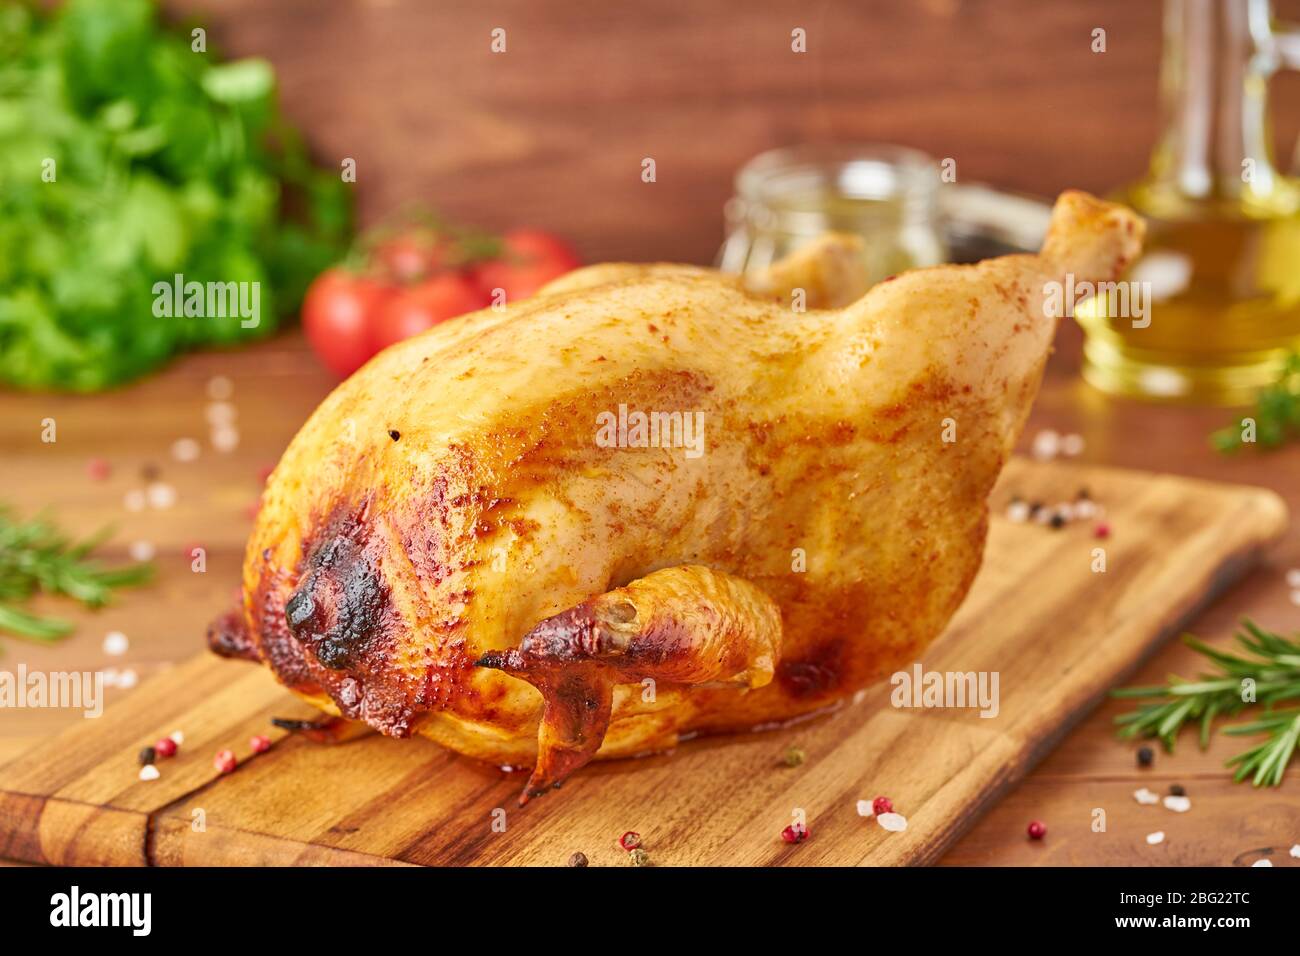 https://c8.alamy.com/comp/2BG22TC/whole-roasted-chicken-on-wooden-cutting-board-on-dark-brown-wooden-table-side-view-2BG22TC.jpg